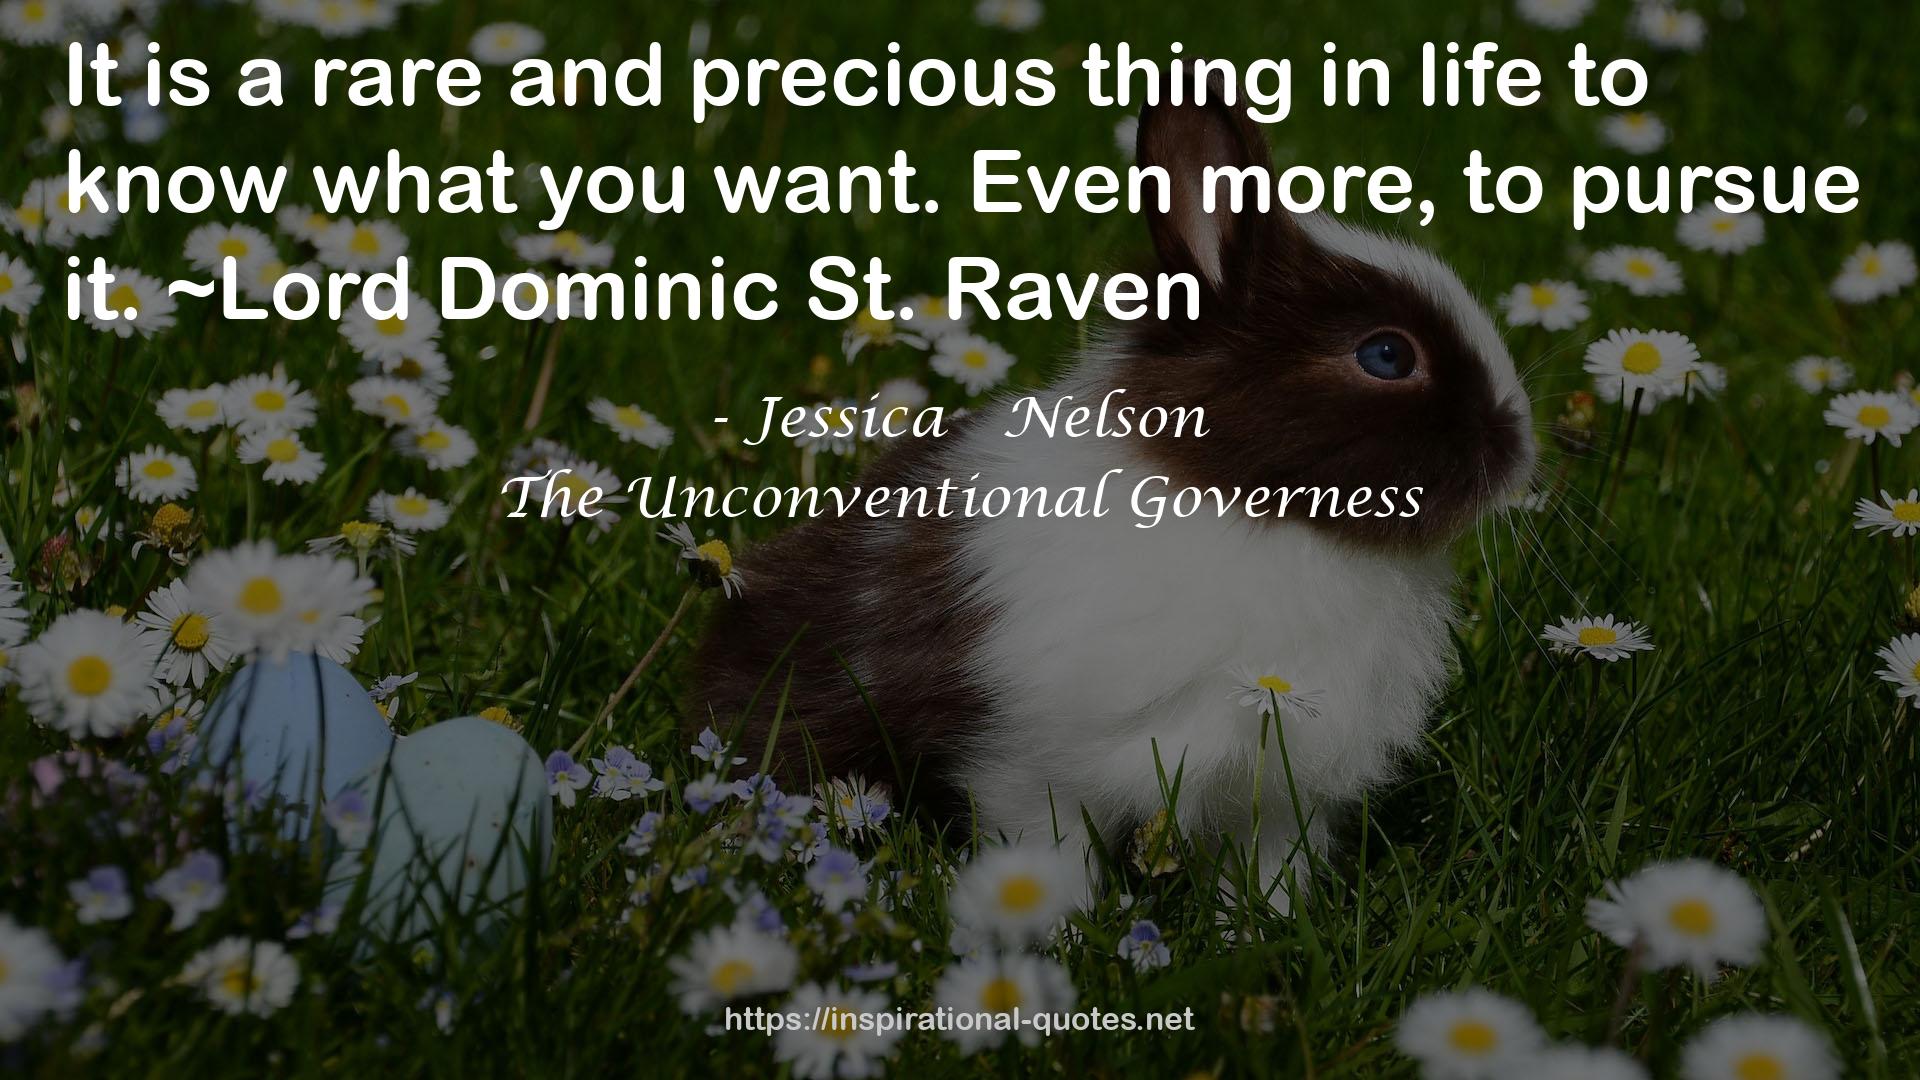 The Unconventional Governess QUOTES